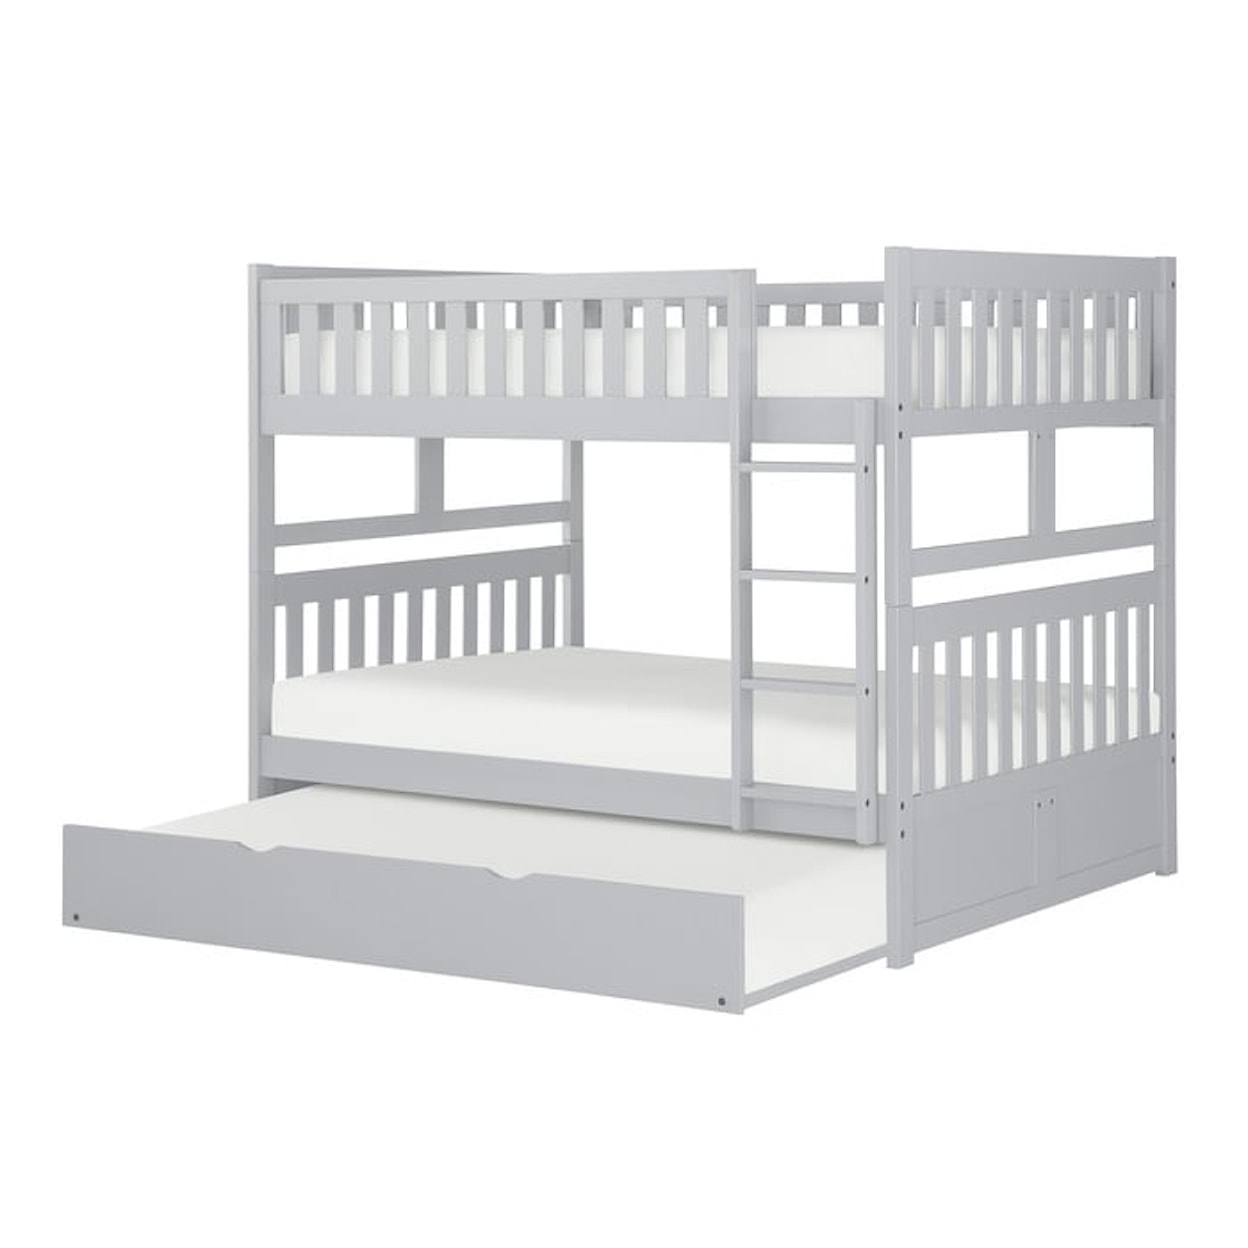 Homelegance Orion Full/Full Bunk Bed with Twin Trundle